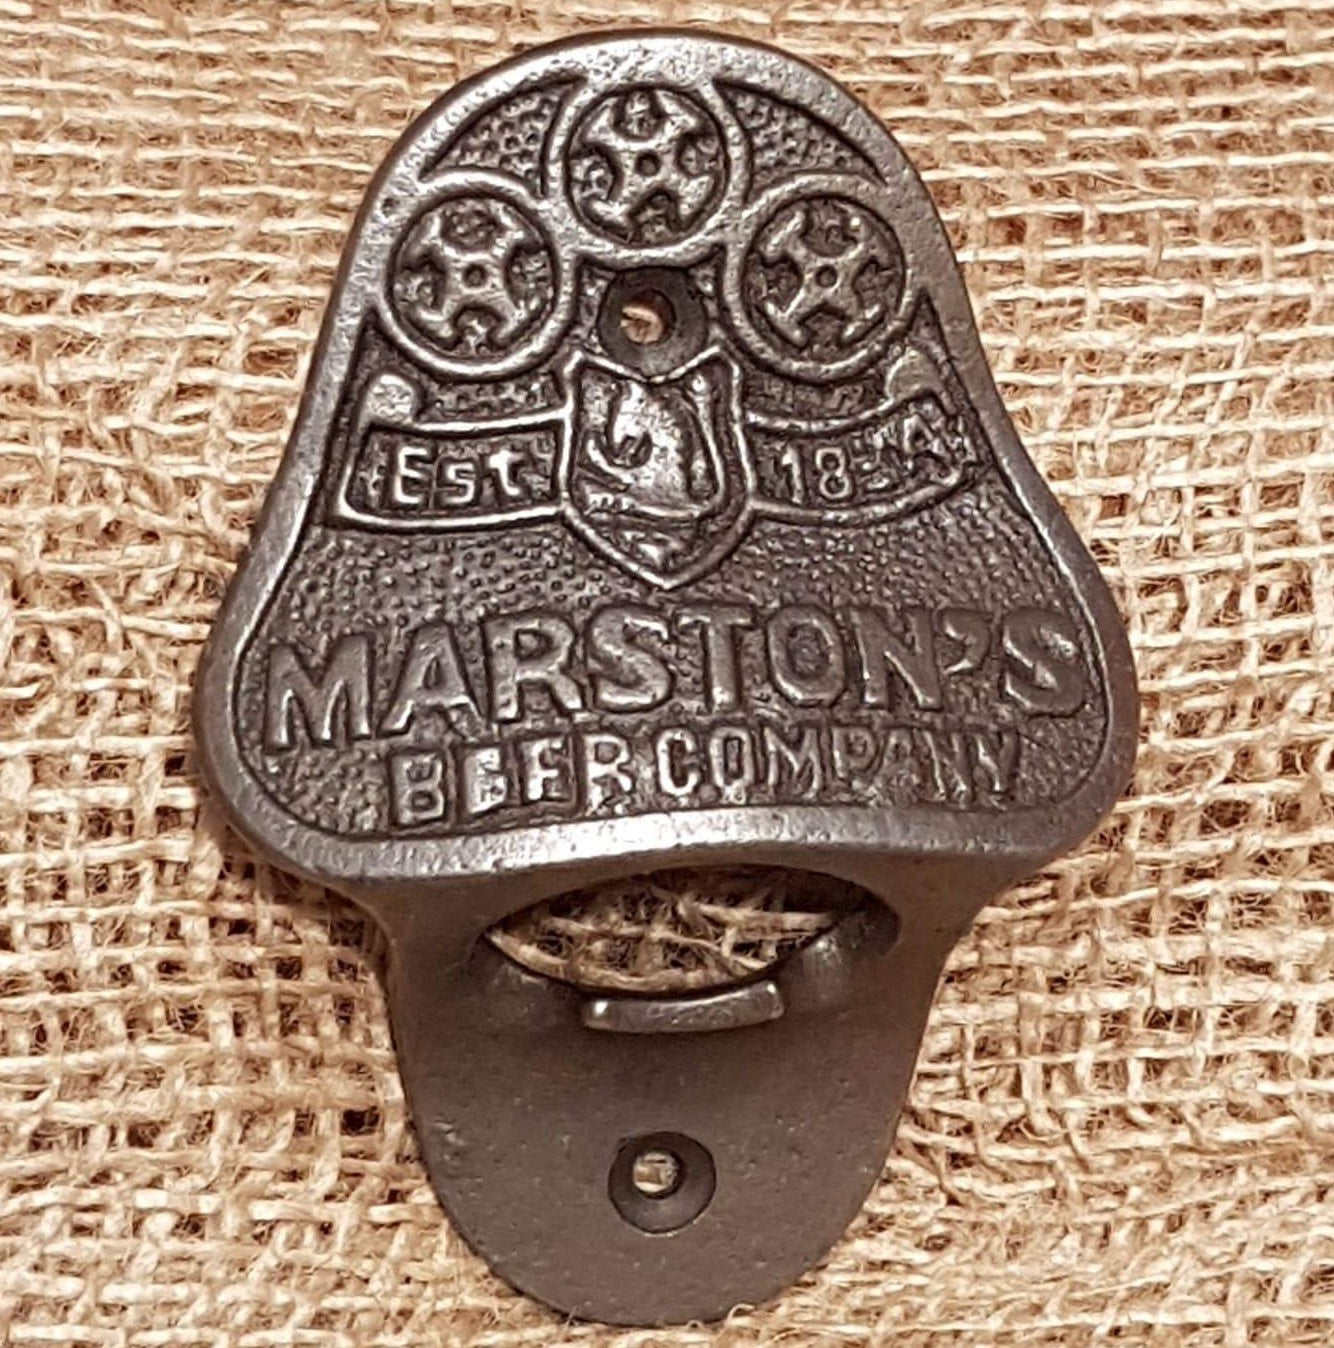 Marstons - Bottle Opener - Spearhead Collection - Bottle Openers - Bottle Openers, The Man Cave